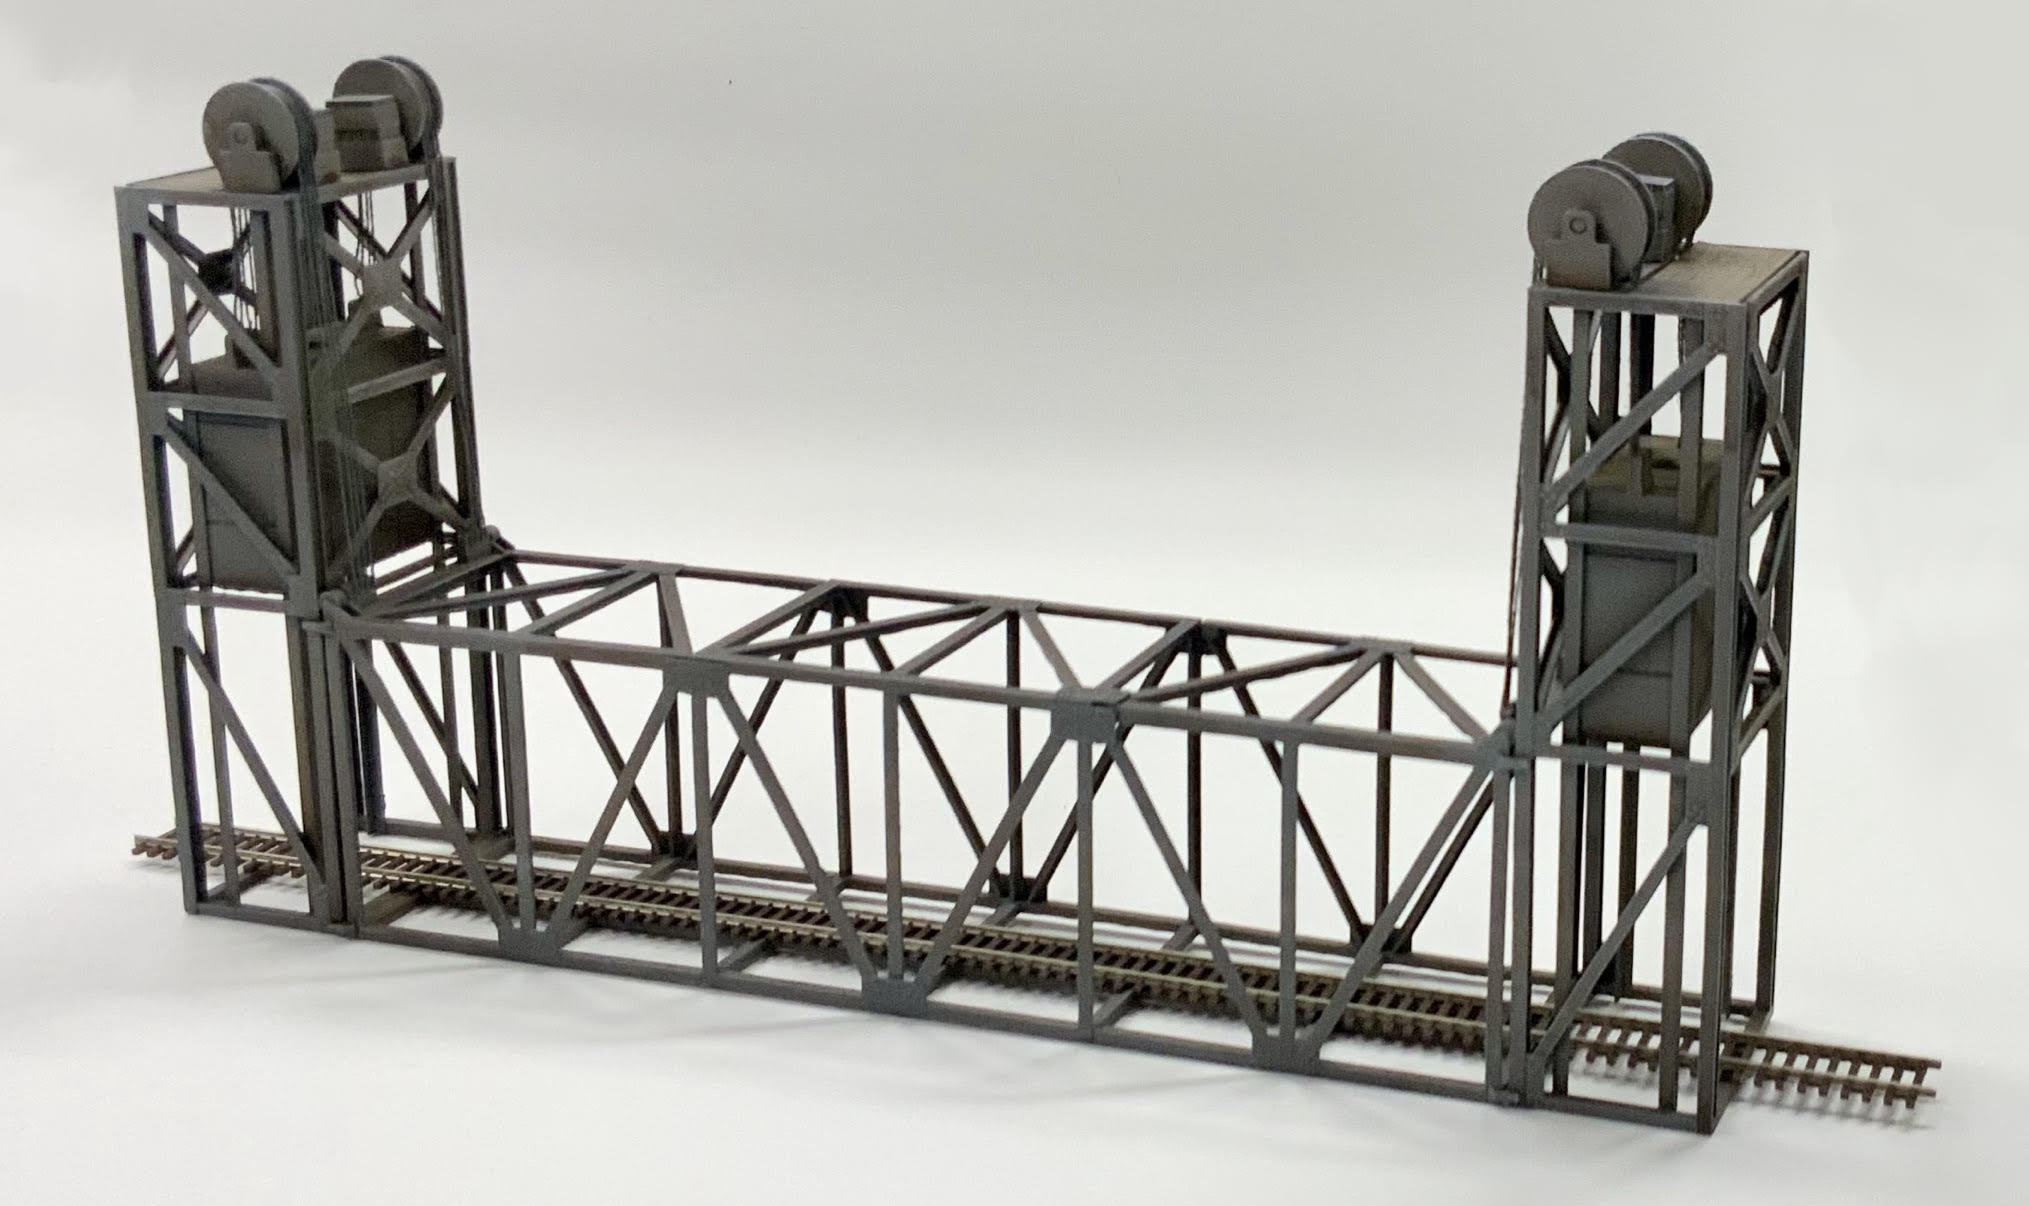 Single Track, HO-Scale lift bridge with counterweights. Adjustable length.
